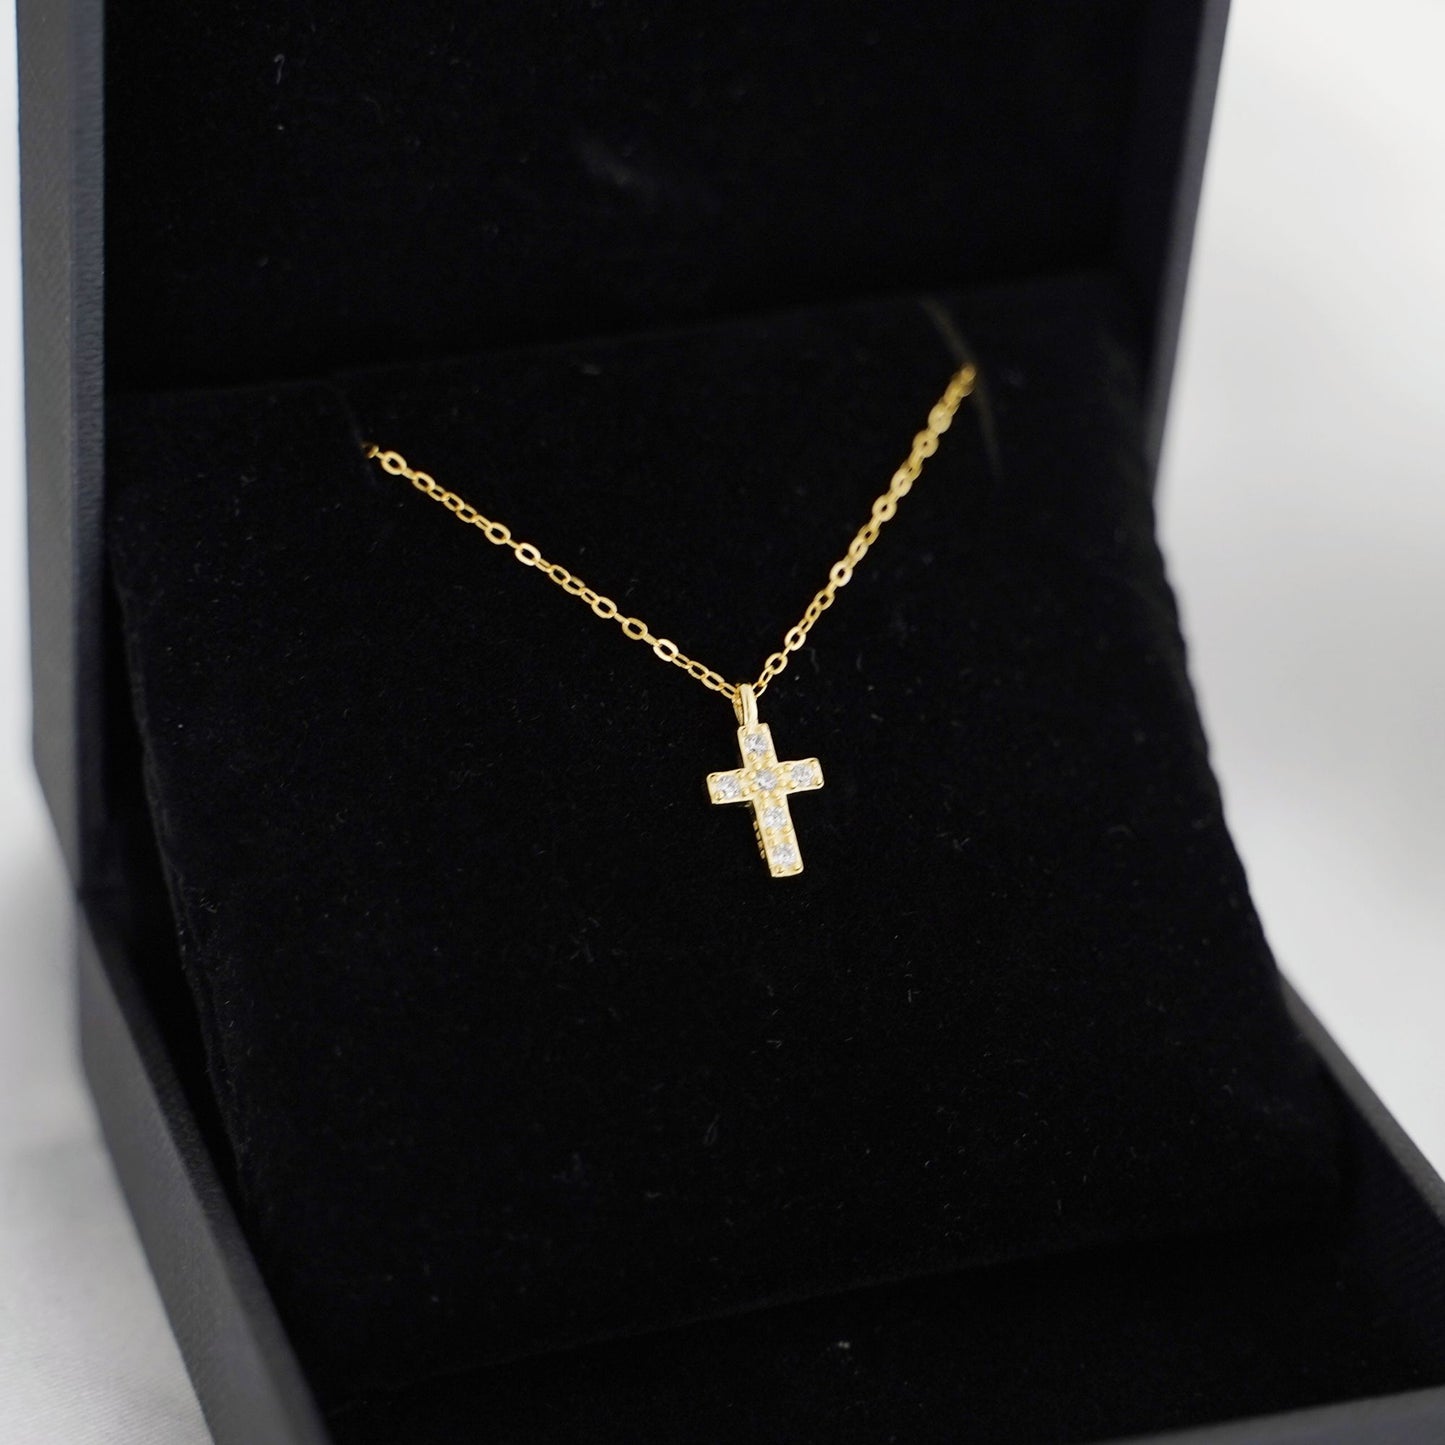 Sterling Silver Small Cross Paved CZ Charm Pendant Chain Necklace 2 Tones - sugarkittenlondon